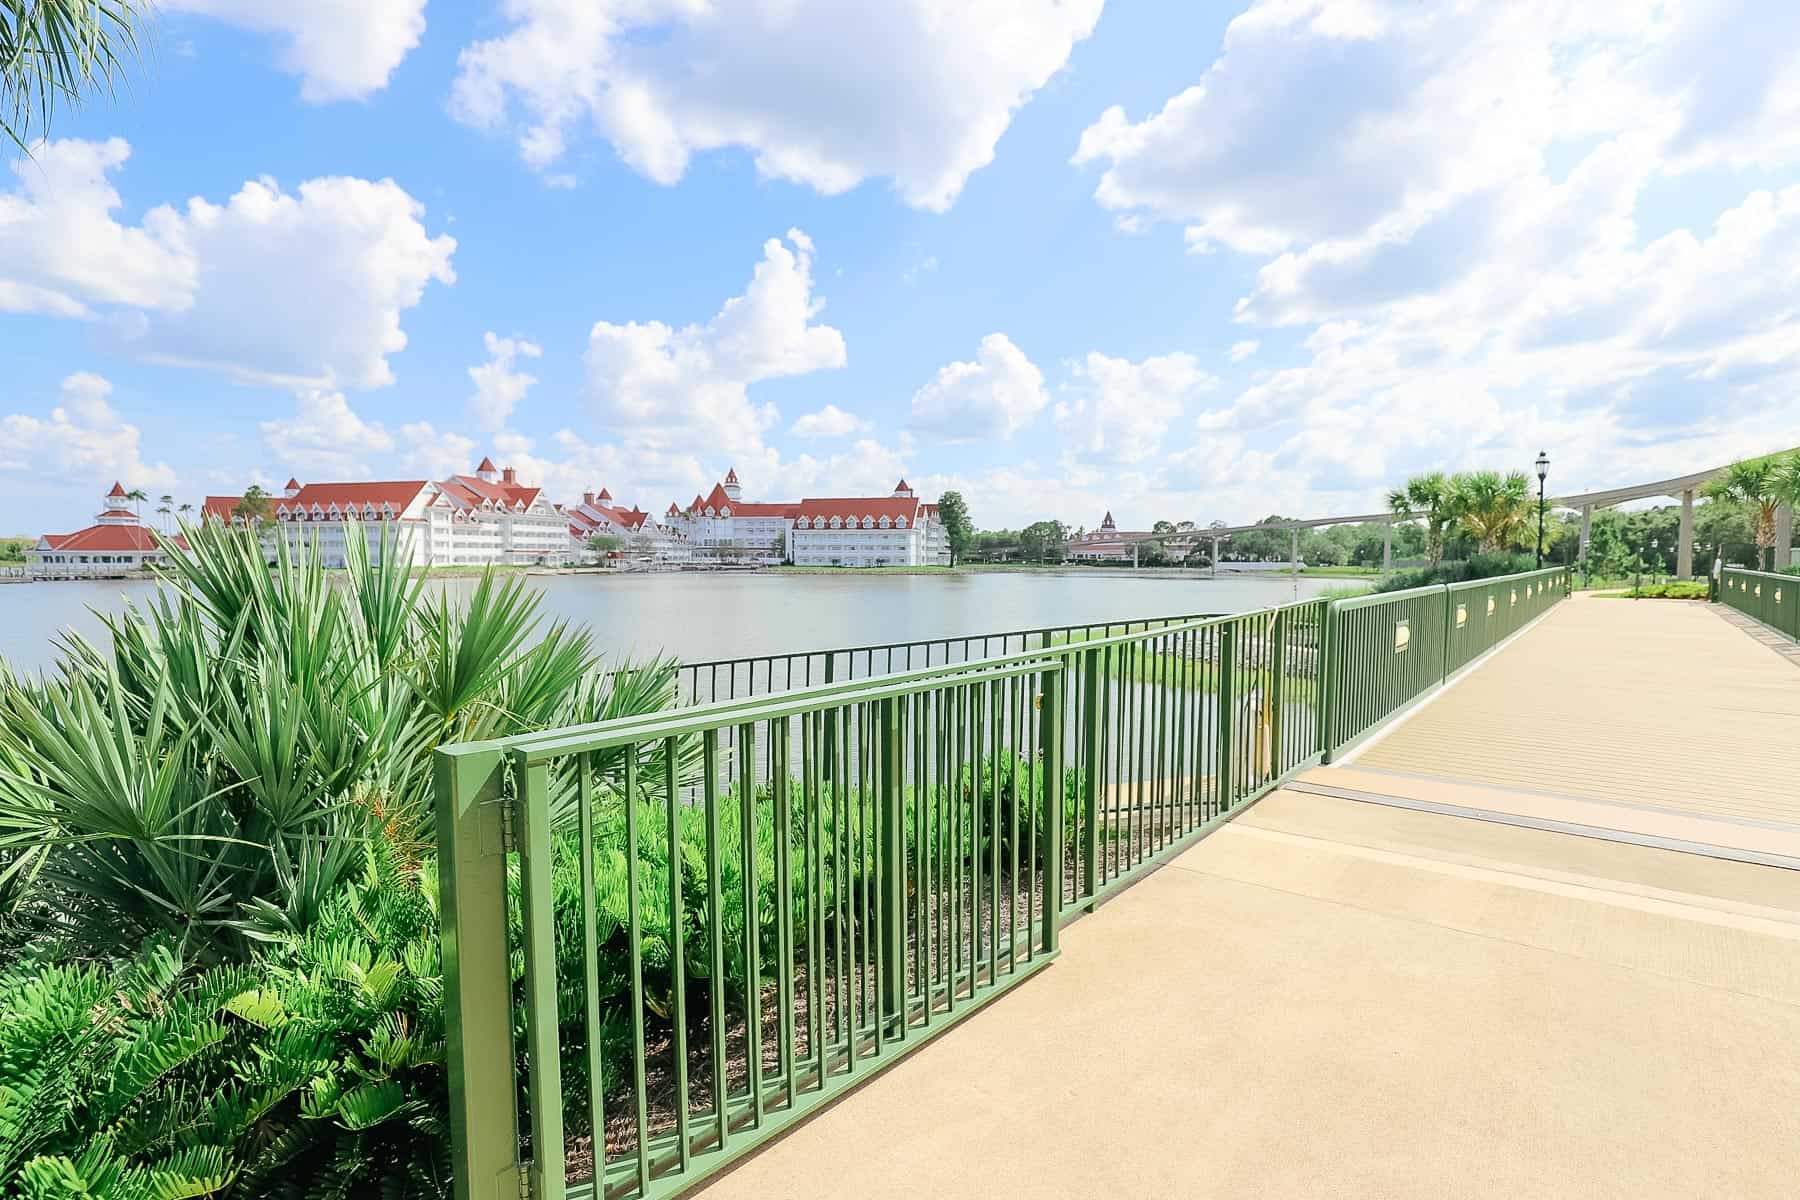 walkway to Magic Kingdom was added to the Grand Floridian as an earlier update 